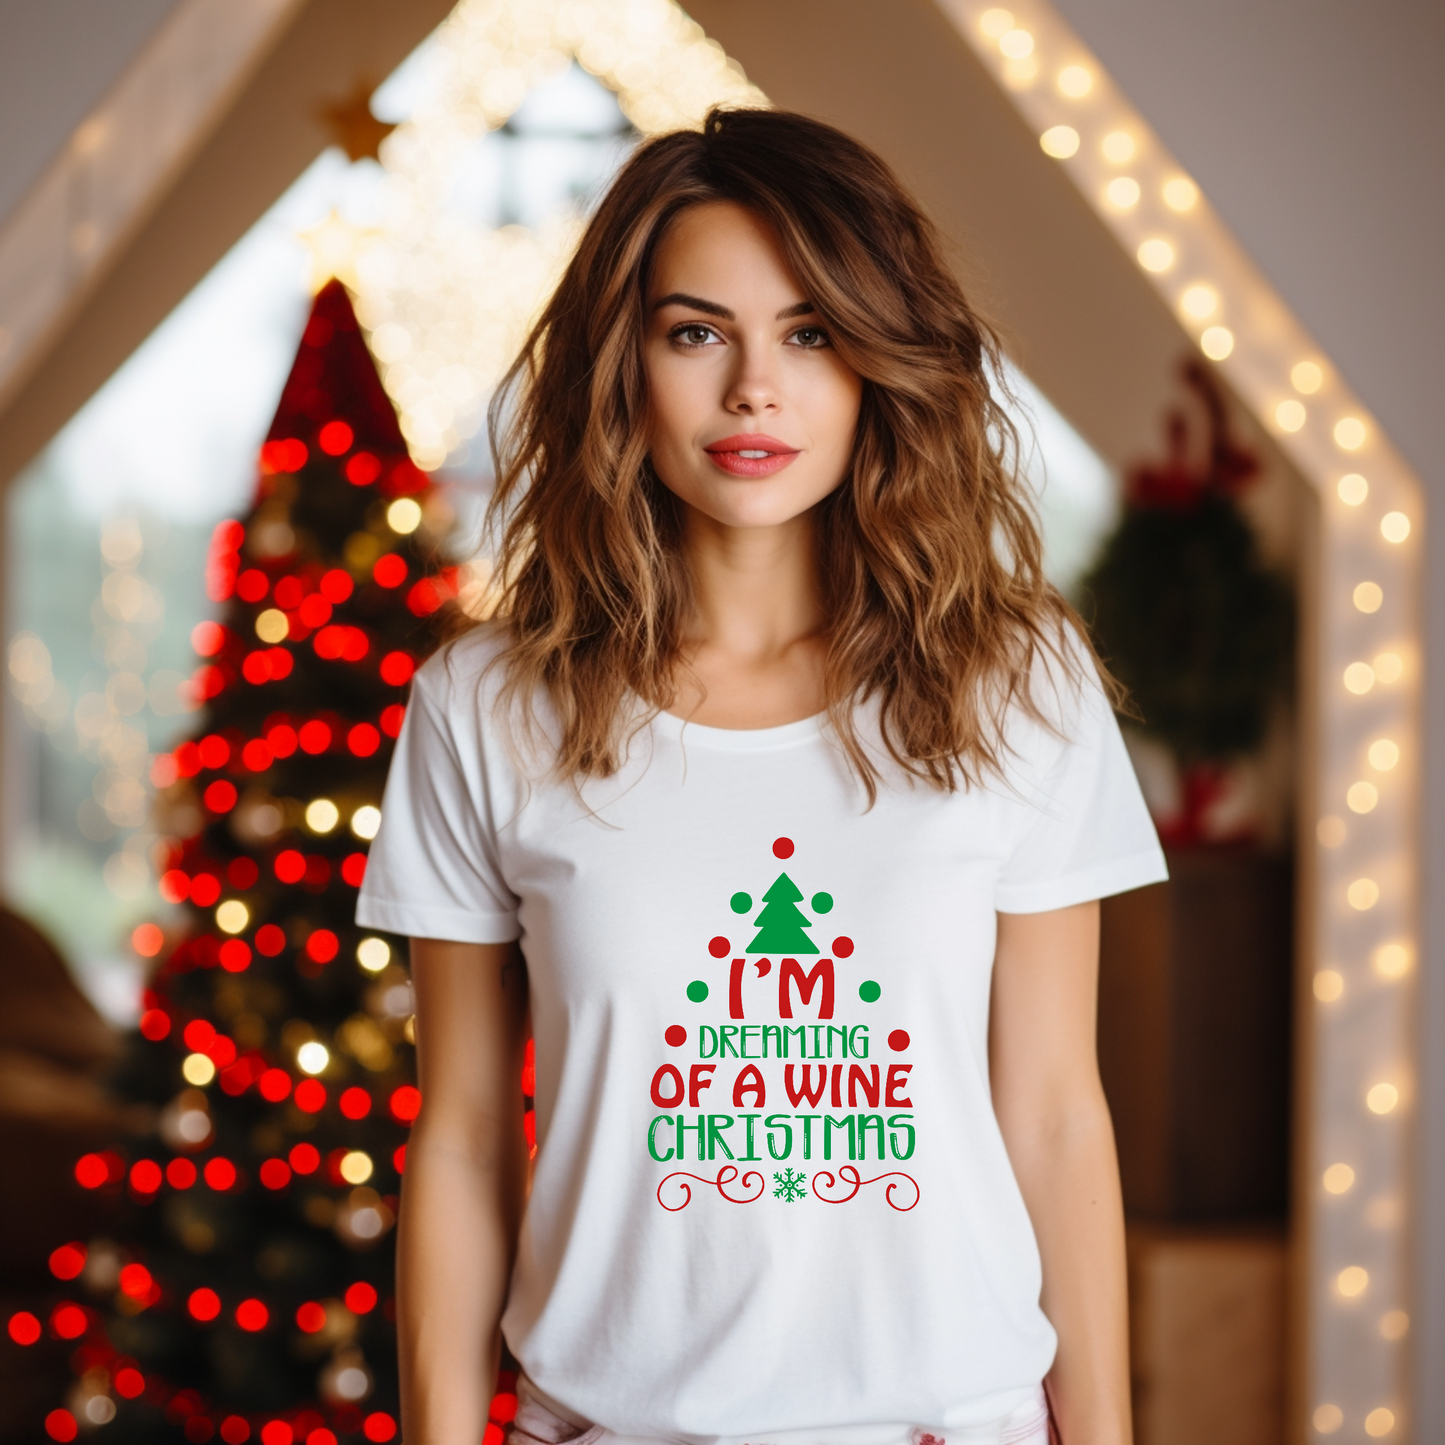 Wine T-Shirt For Christmas T Shirt For Dream TShirt For Drinking Tee For Holiday Gift Idea